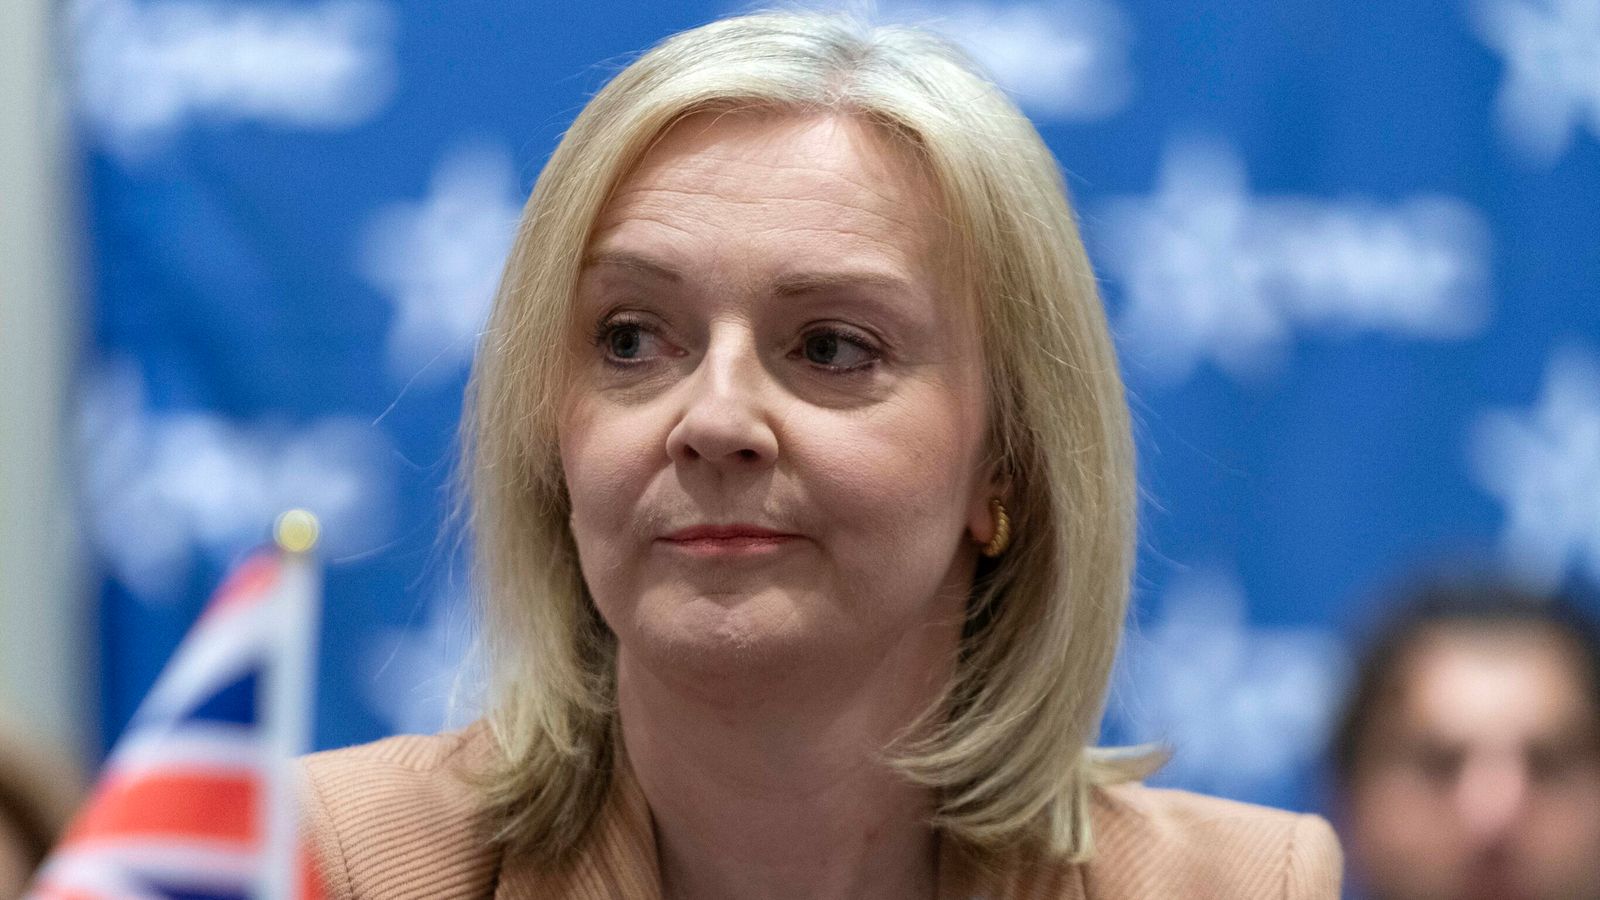 Liz Truss' constituency hangs in the balance after voters look to cast ballots on her record as PM